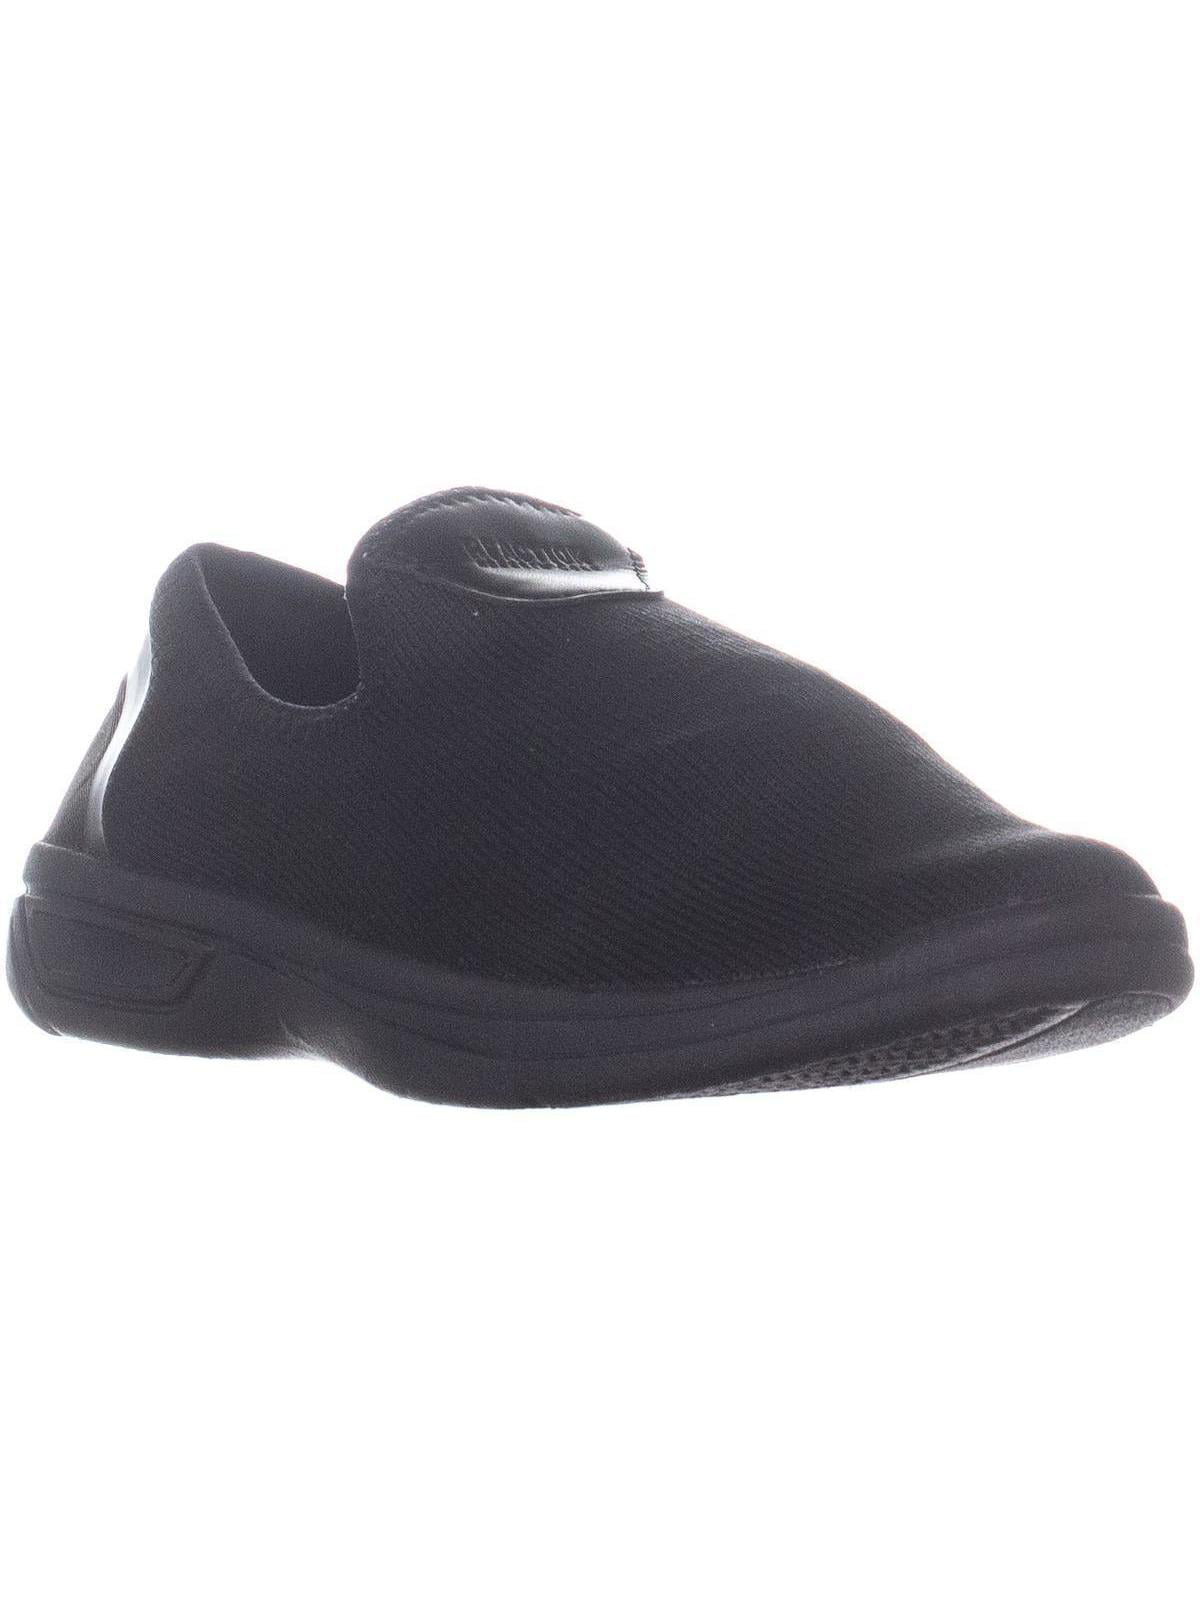 Kenneth Cole REACTION Womens The Ready Slip on Sneaker